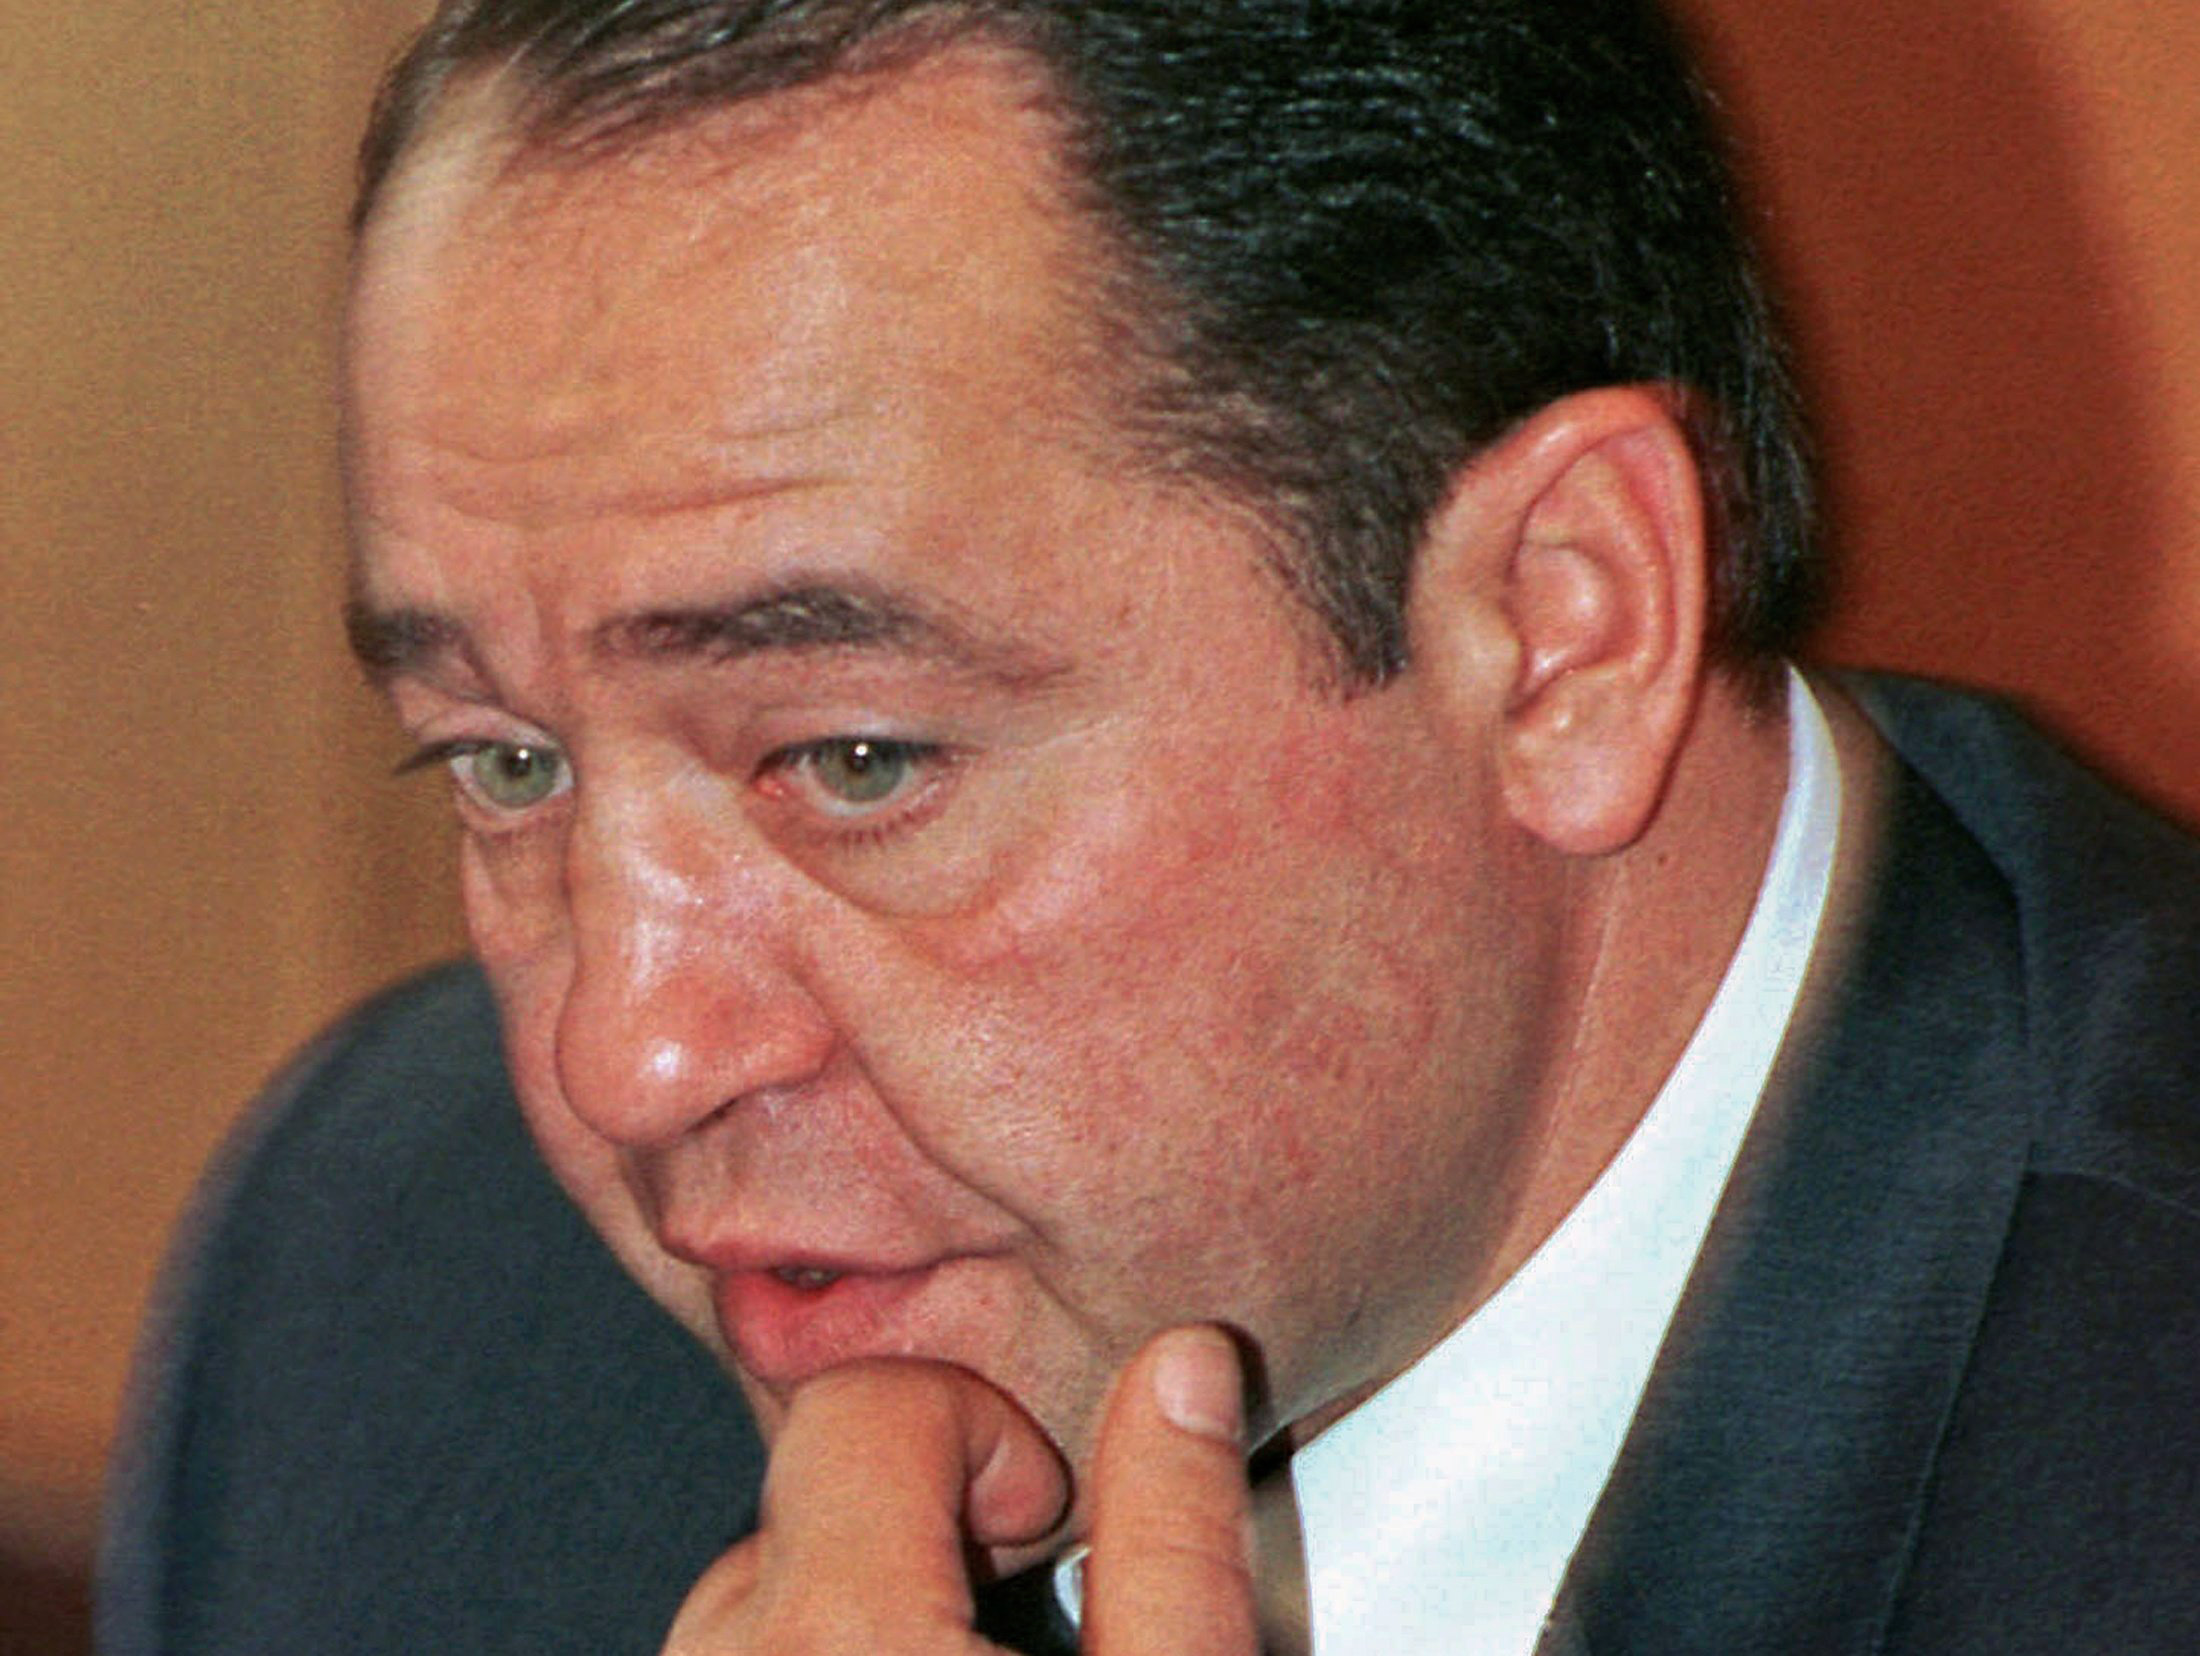 Former Russian Media Minister Mikhail Lesin gestures during a news conference in Moscow, Sept. 20, 2000. Lesin, who once headed state-controlled media giant Gazprom-Media, died of blunt force injuries to the head last year in Washington, authorities said March 10, 2016.